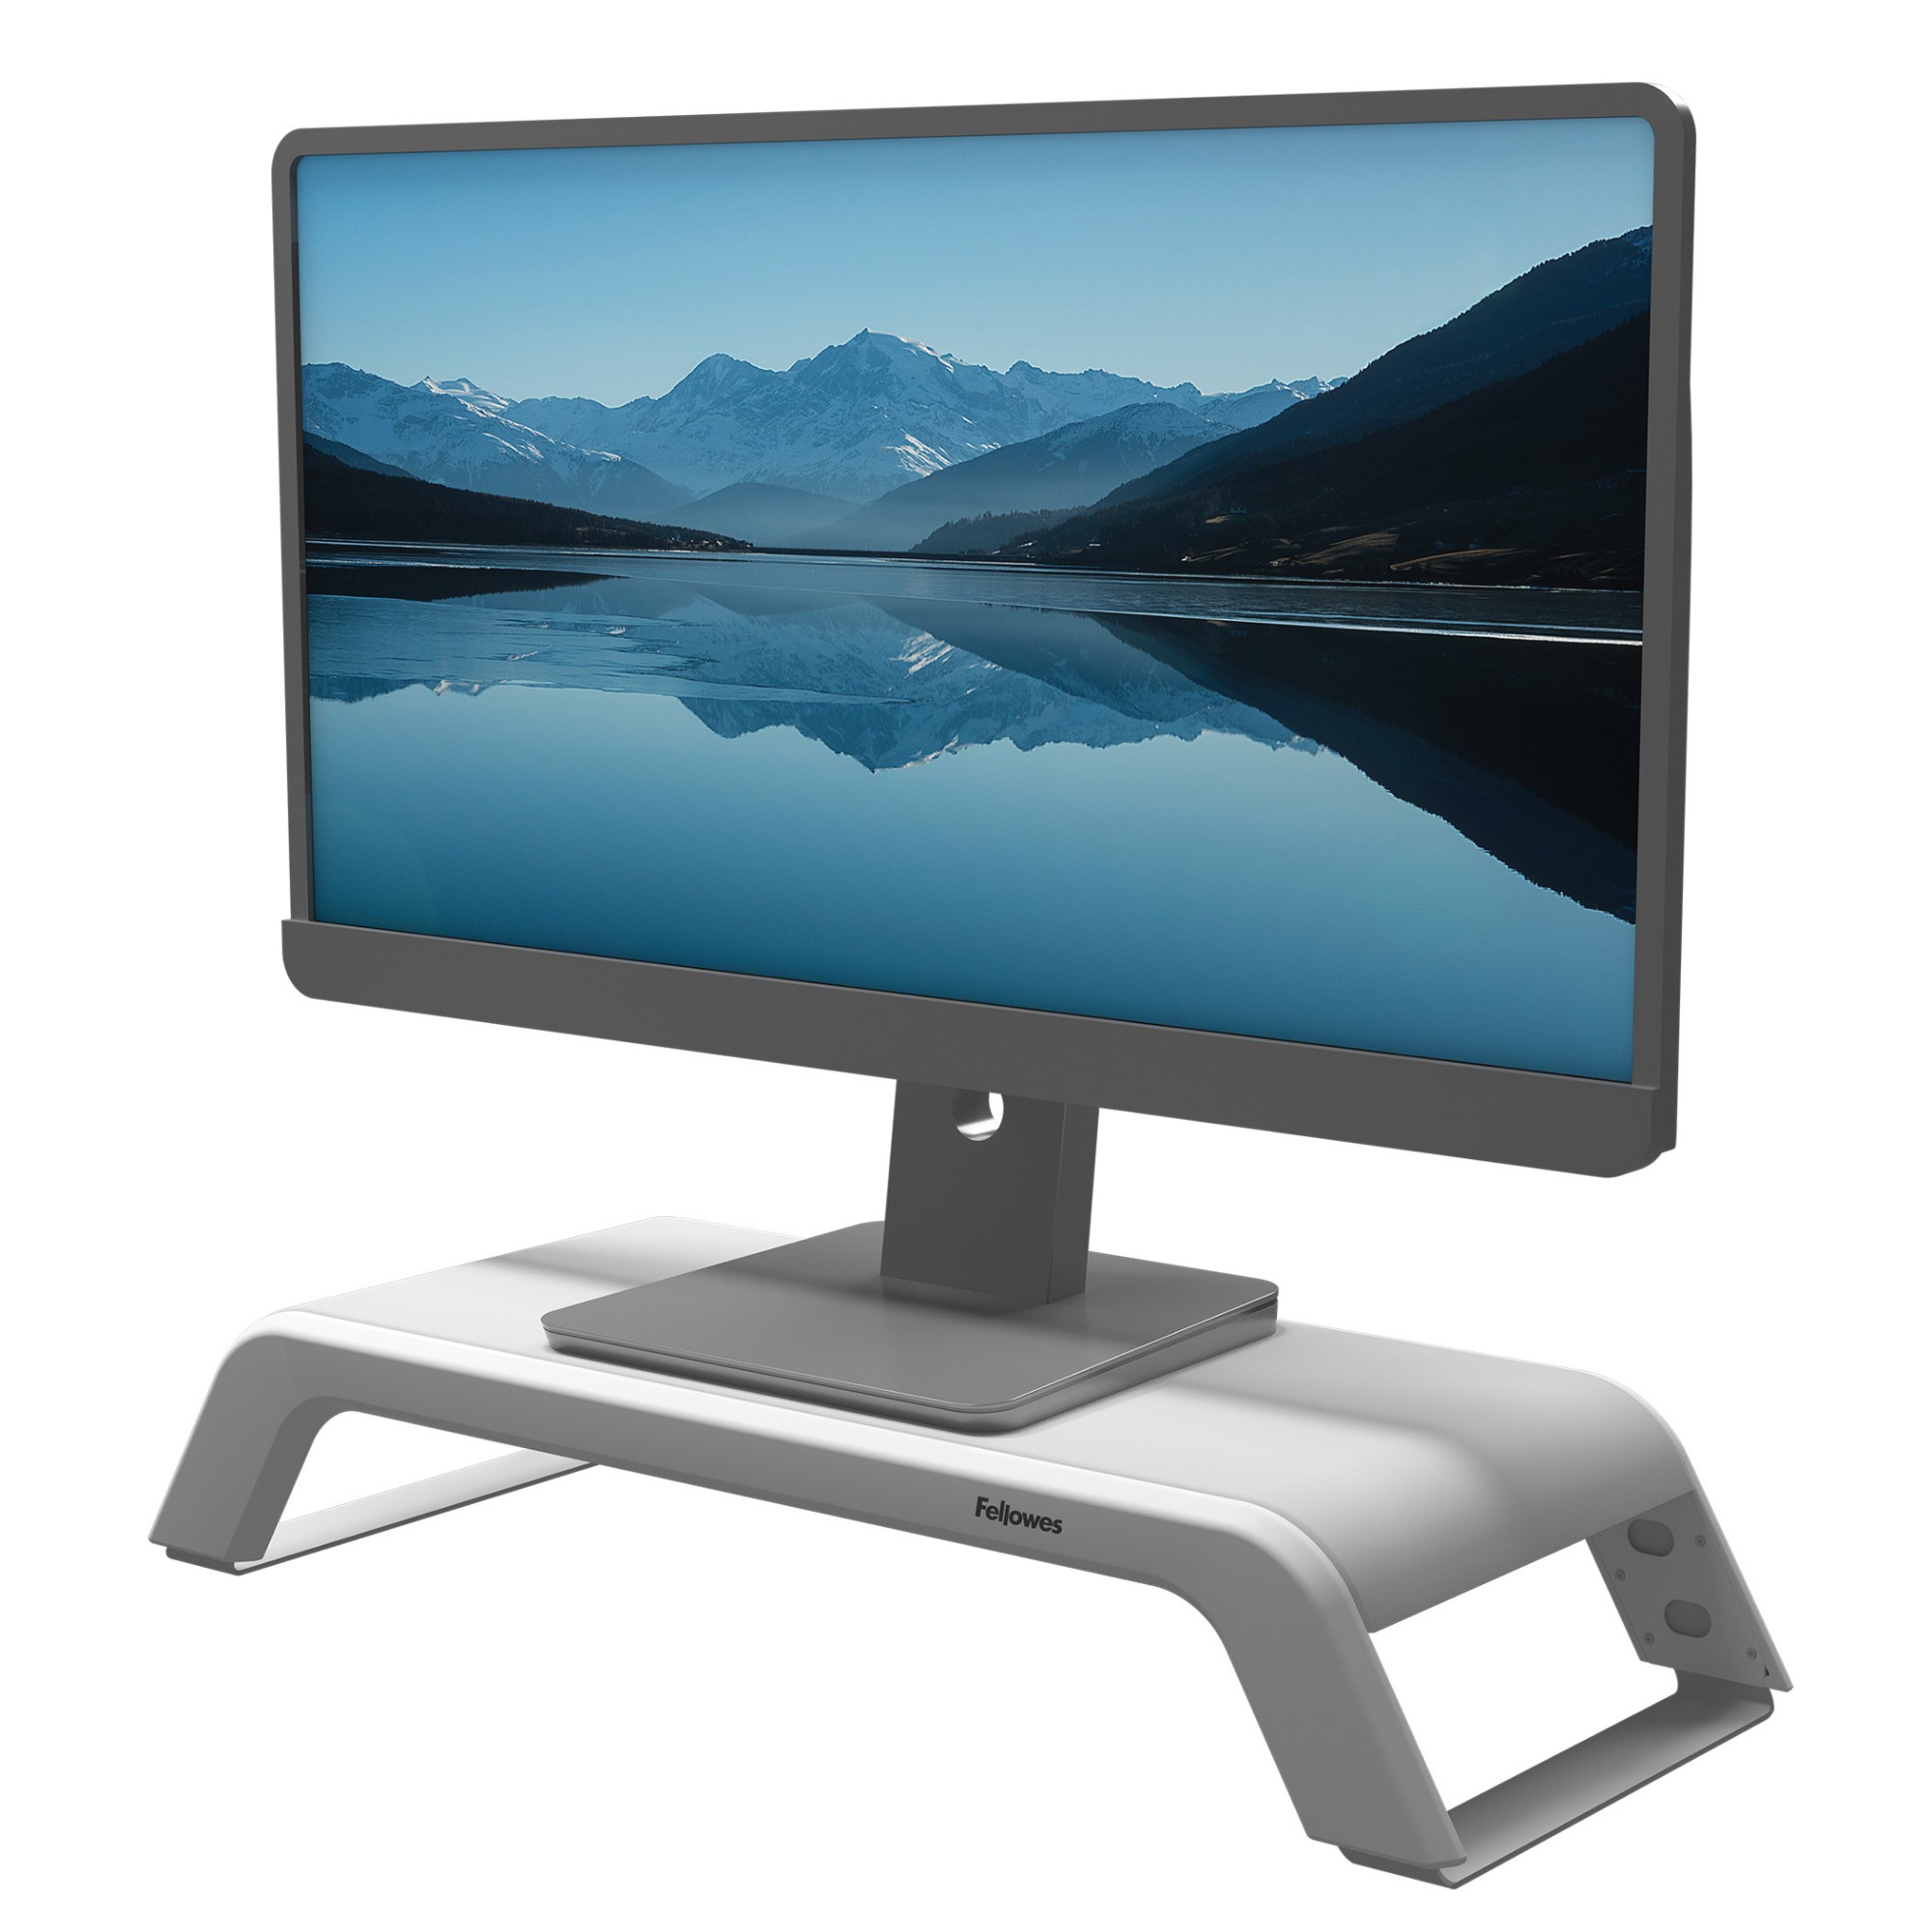 Photos - Mount/Stand Fellowes Computer Monitor Stand with 3 Height Adjustments - Hana LT Mo 100 